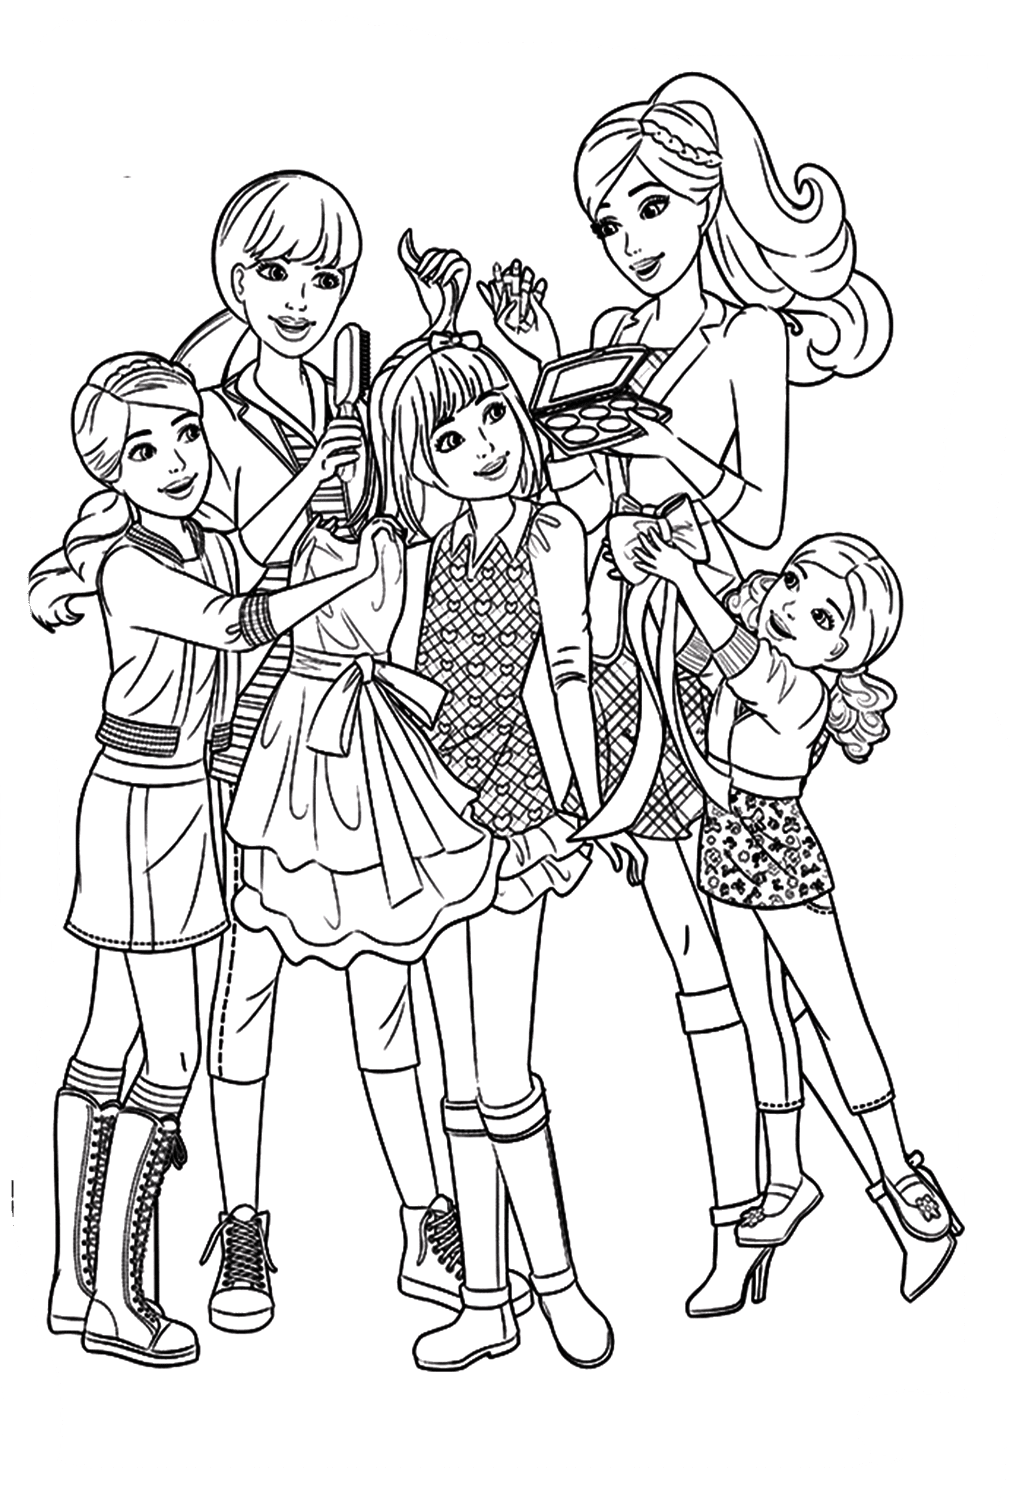 Barbies On Sisters Day Coloring Page - Free Printable Coloring Pages